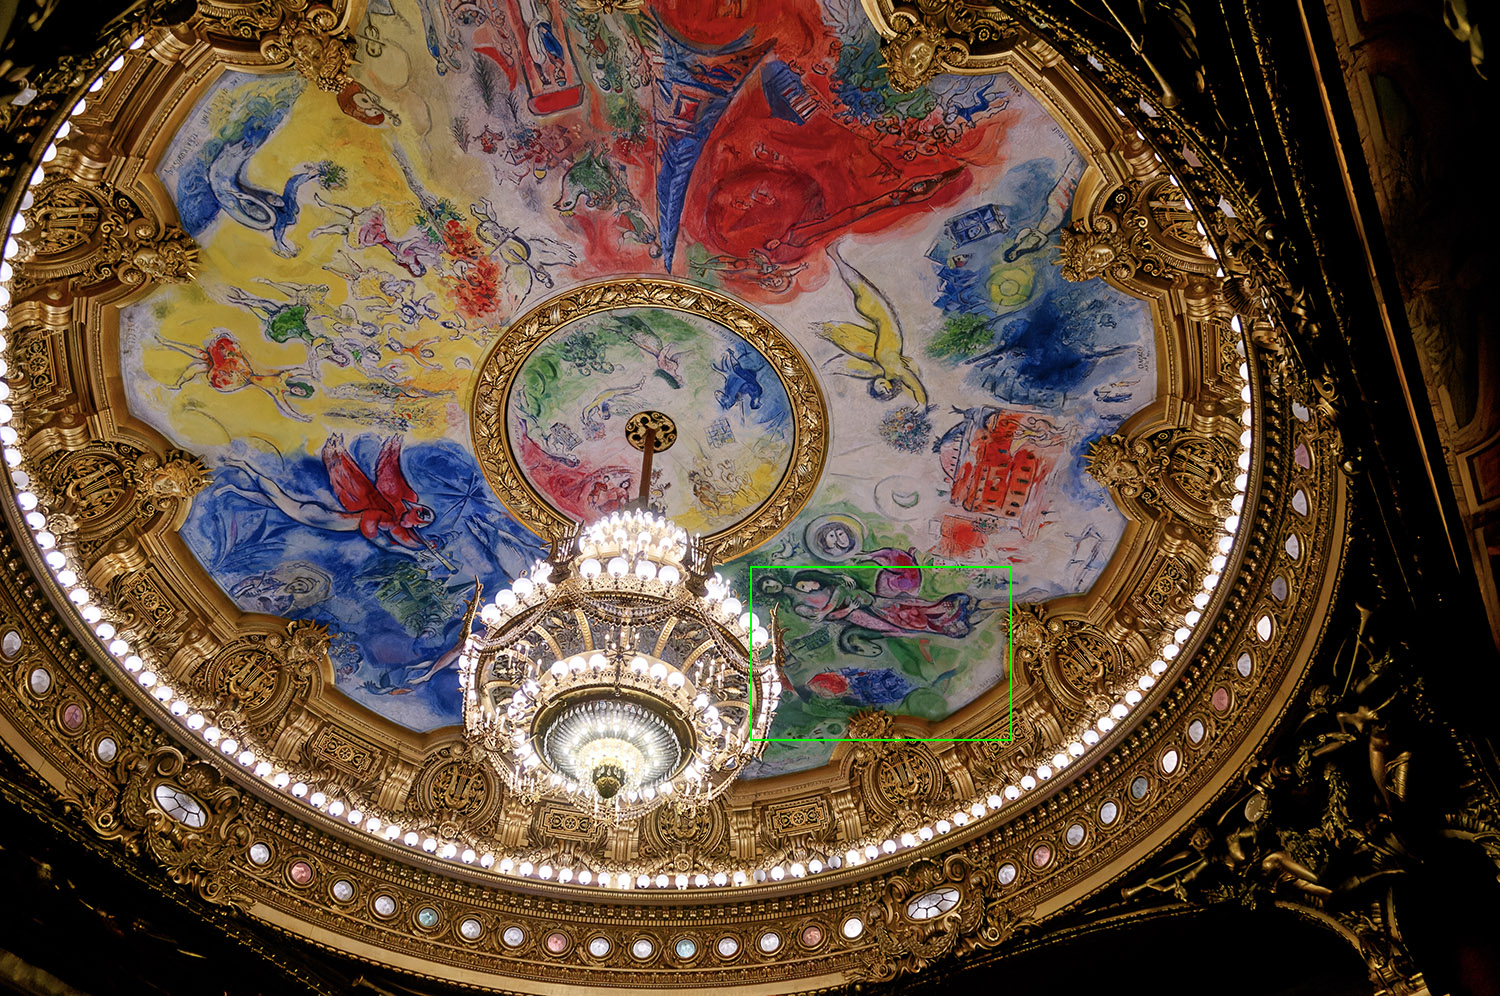 Paris Opera ceiling, December 2011, Nikon D300 – ISO 3200 – 1/500 – ƒ/3.5 – 72mm – Exp. -⅓. (Click to download the raw file)